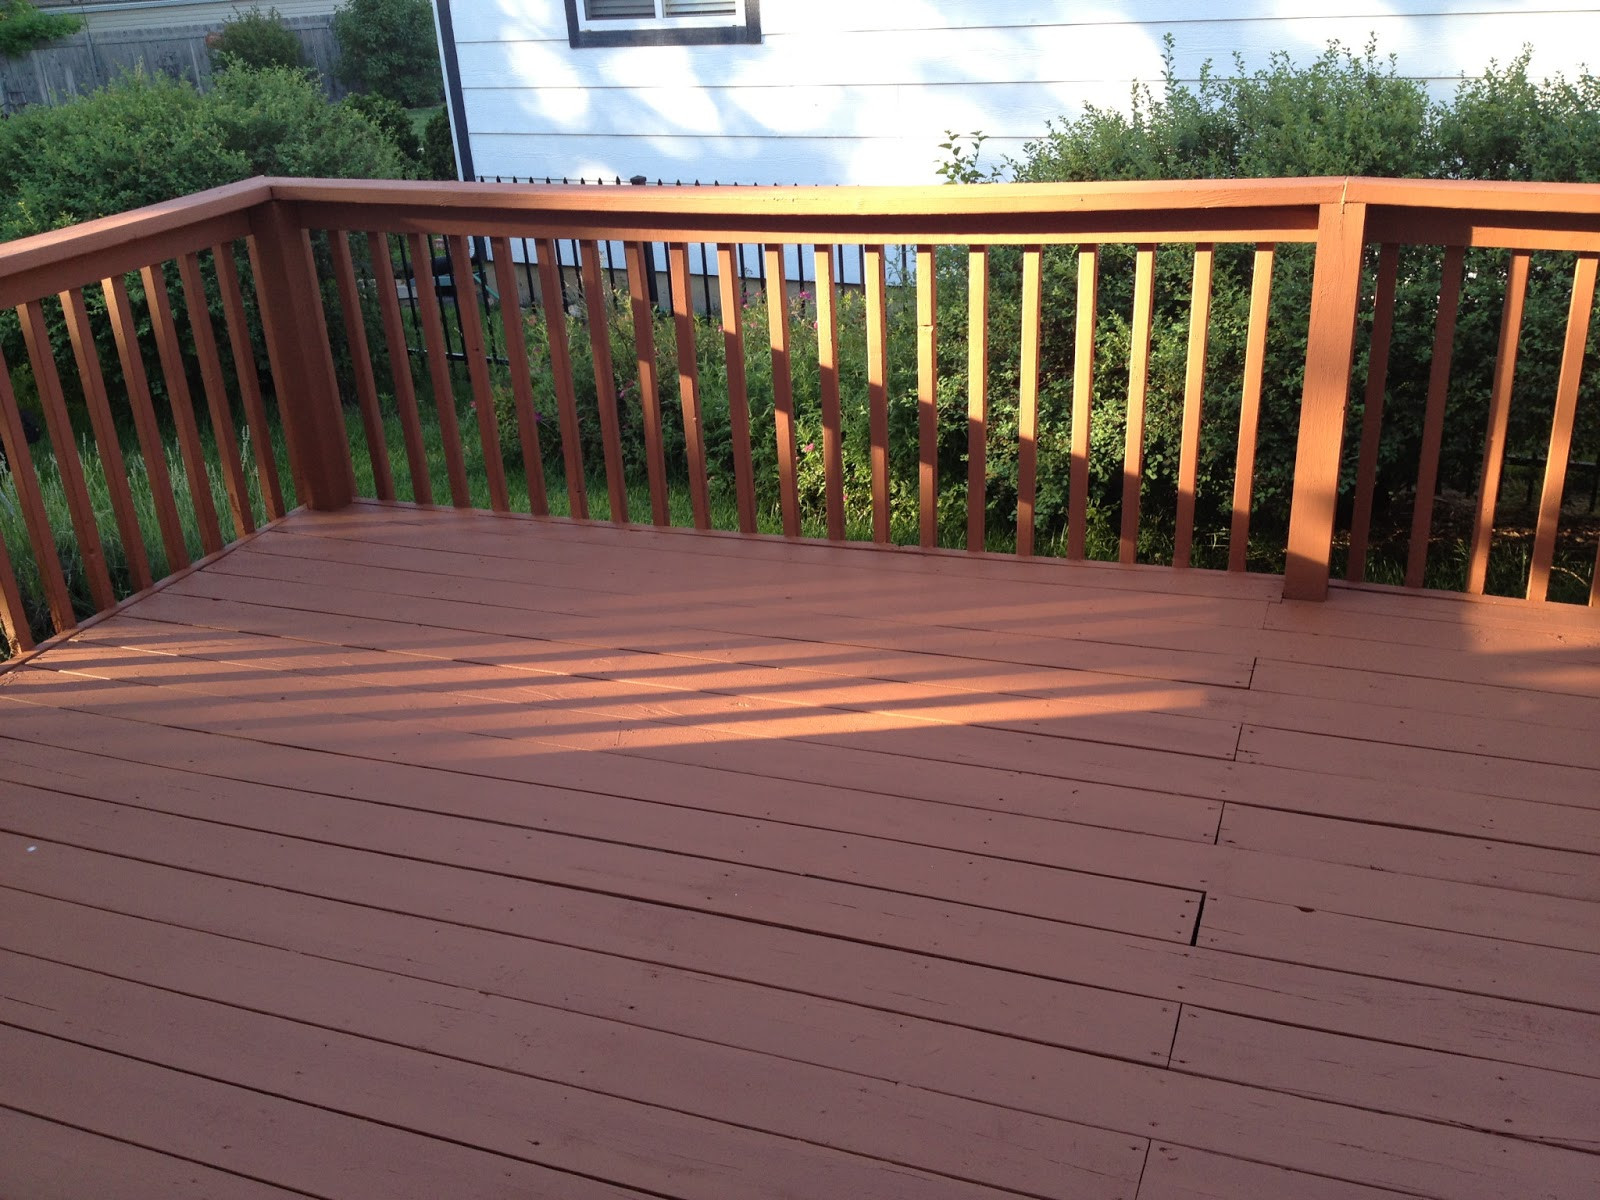 Deck Paint Colors
 Decking Nice Outdoor Home Design With Behr Deck Paint